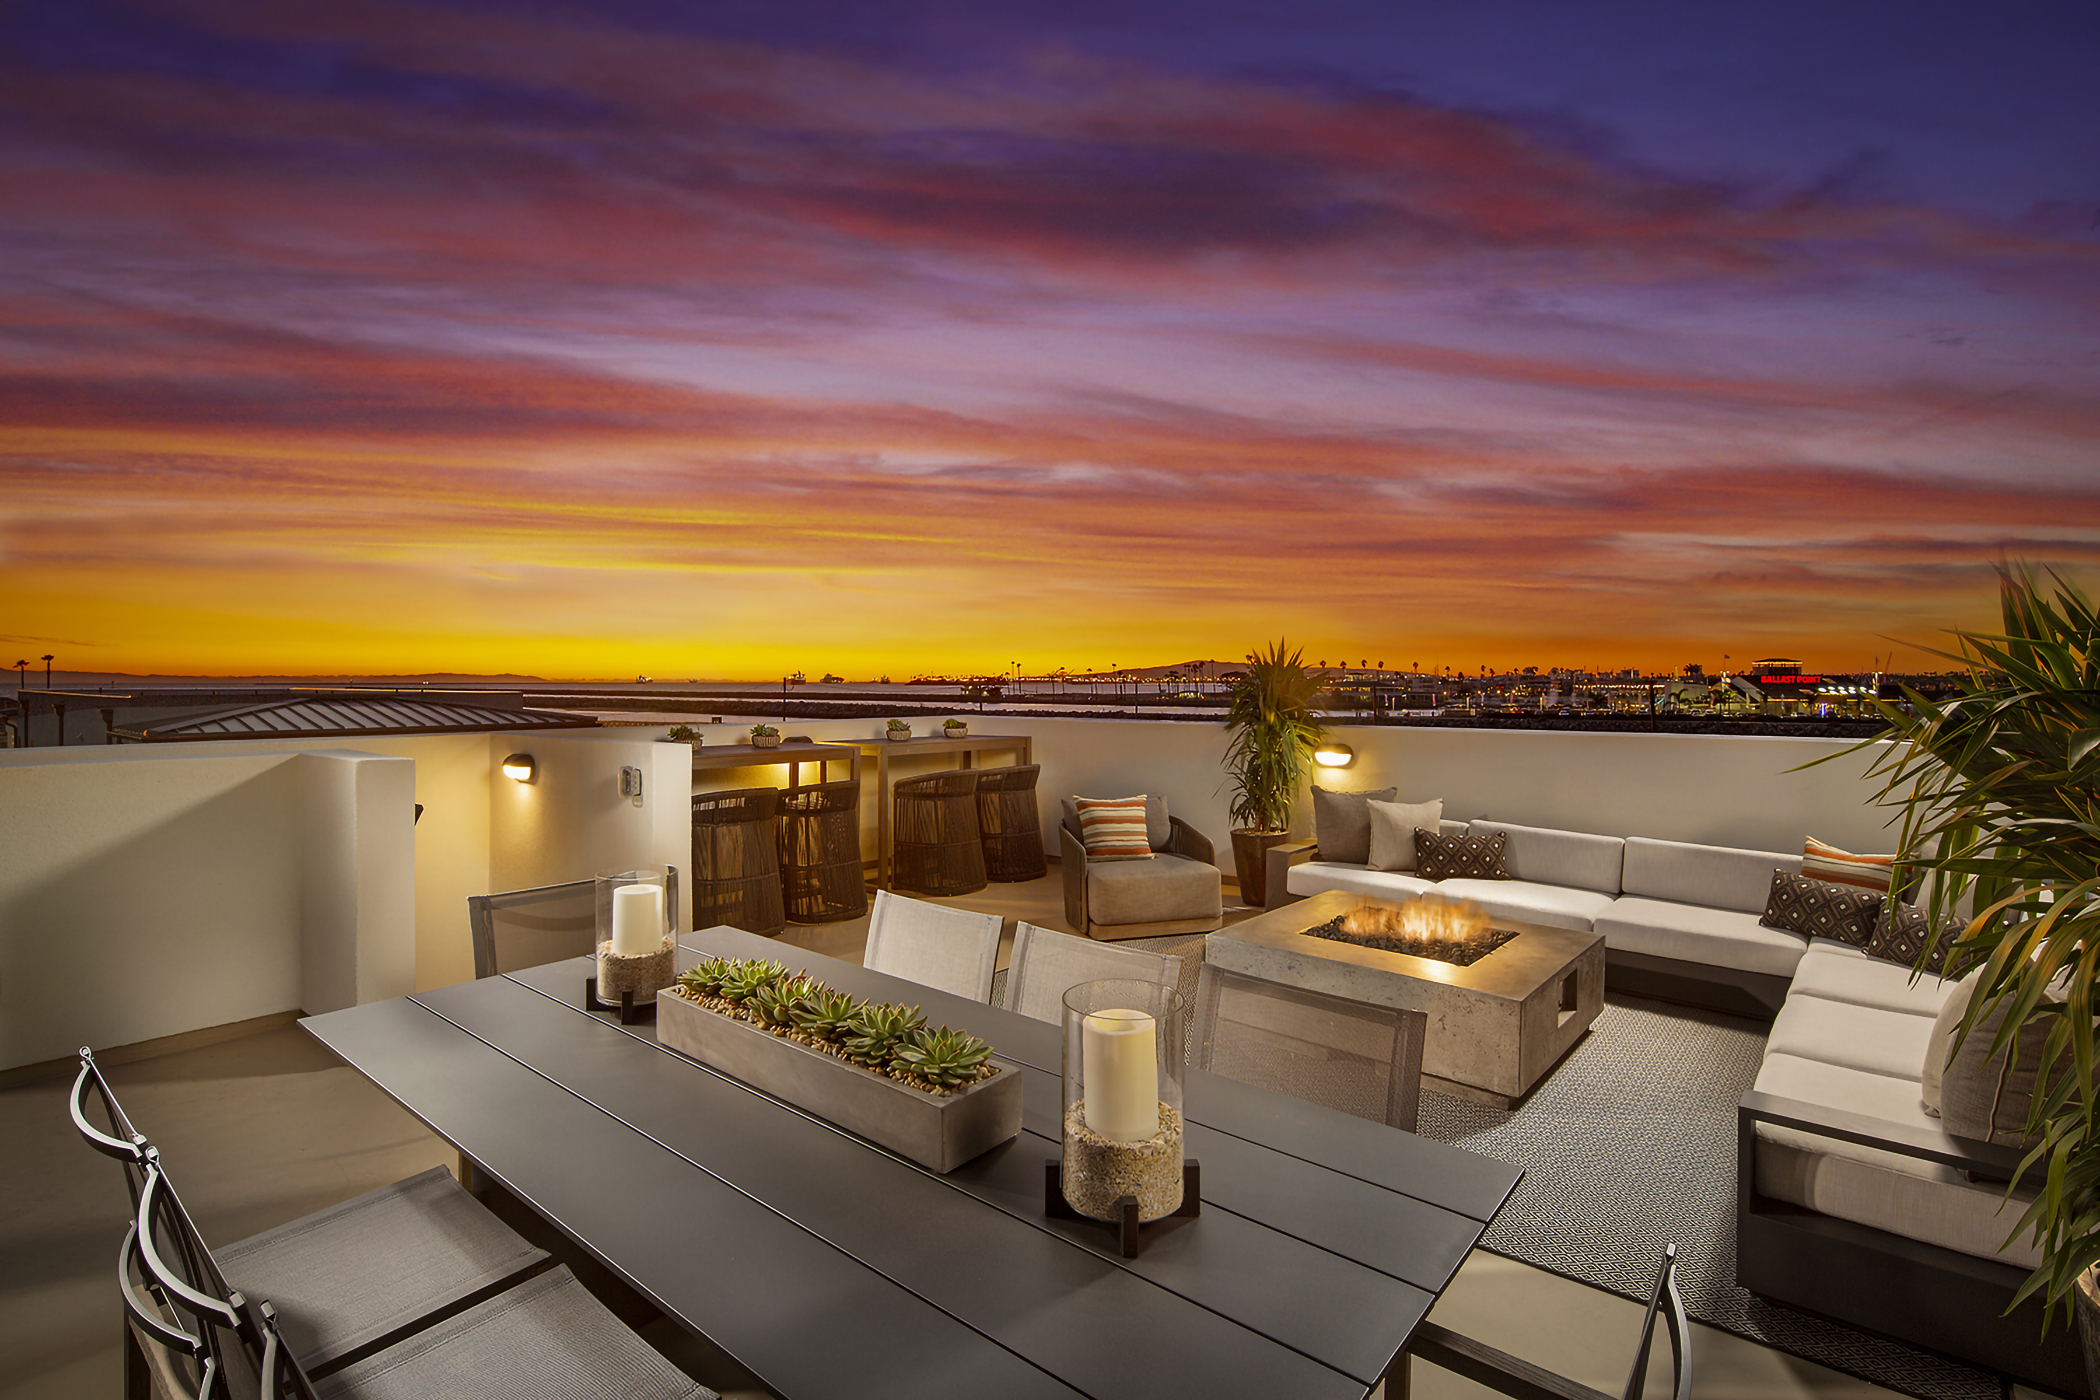 Ocean Place by Shea Homes is an exclusive opportunity to live on the water in a sophisticated, brand new home with a Seal Beach coastal address. Presenting elegant floor plans with contemporary architectural styles, the single-family detached residences offer exciting modern finishes and dramatic waterfront views from spectacular rooftop decks and stylish outdoor spaces. PICTURED: Rooftop Deck, Plan 5.